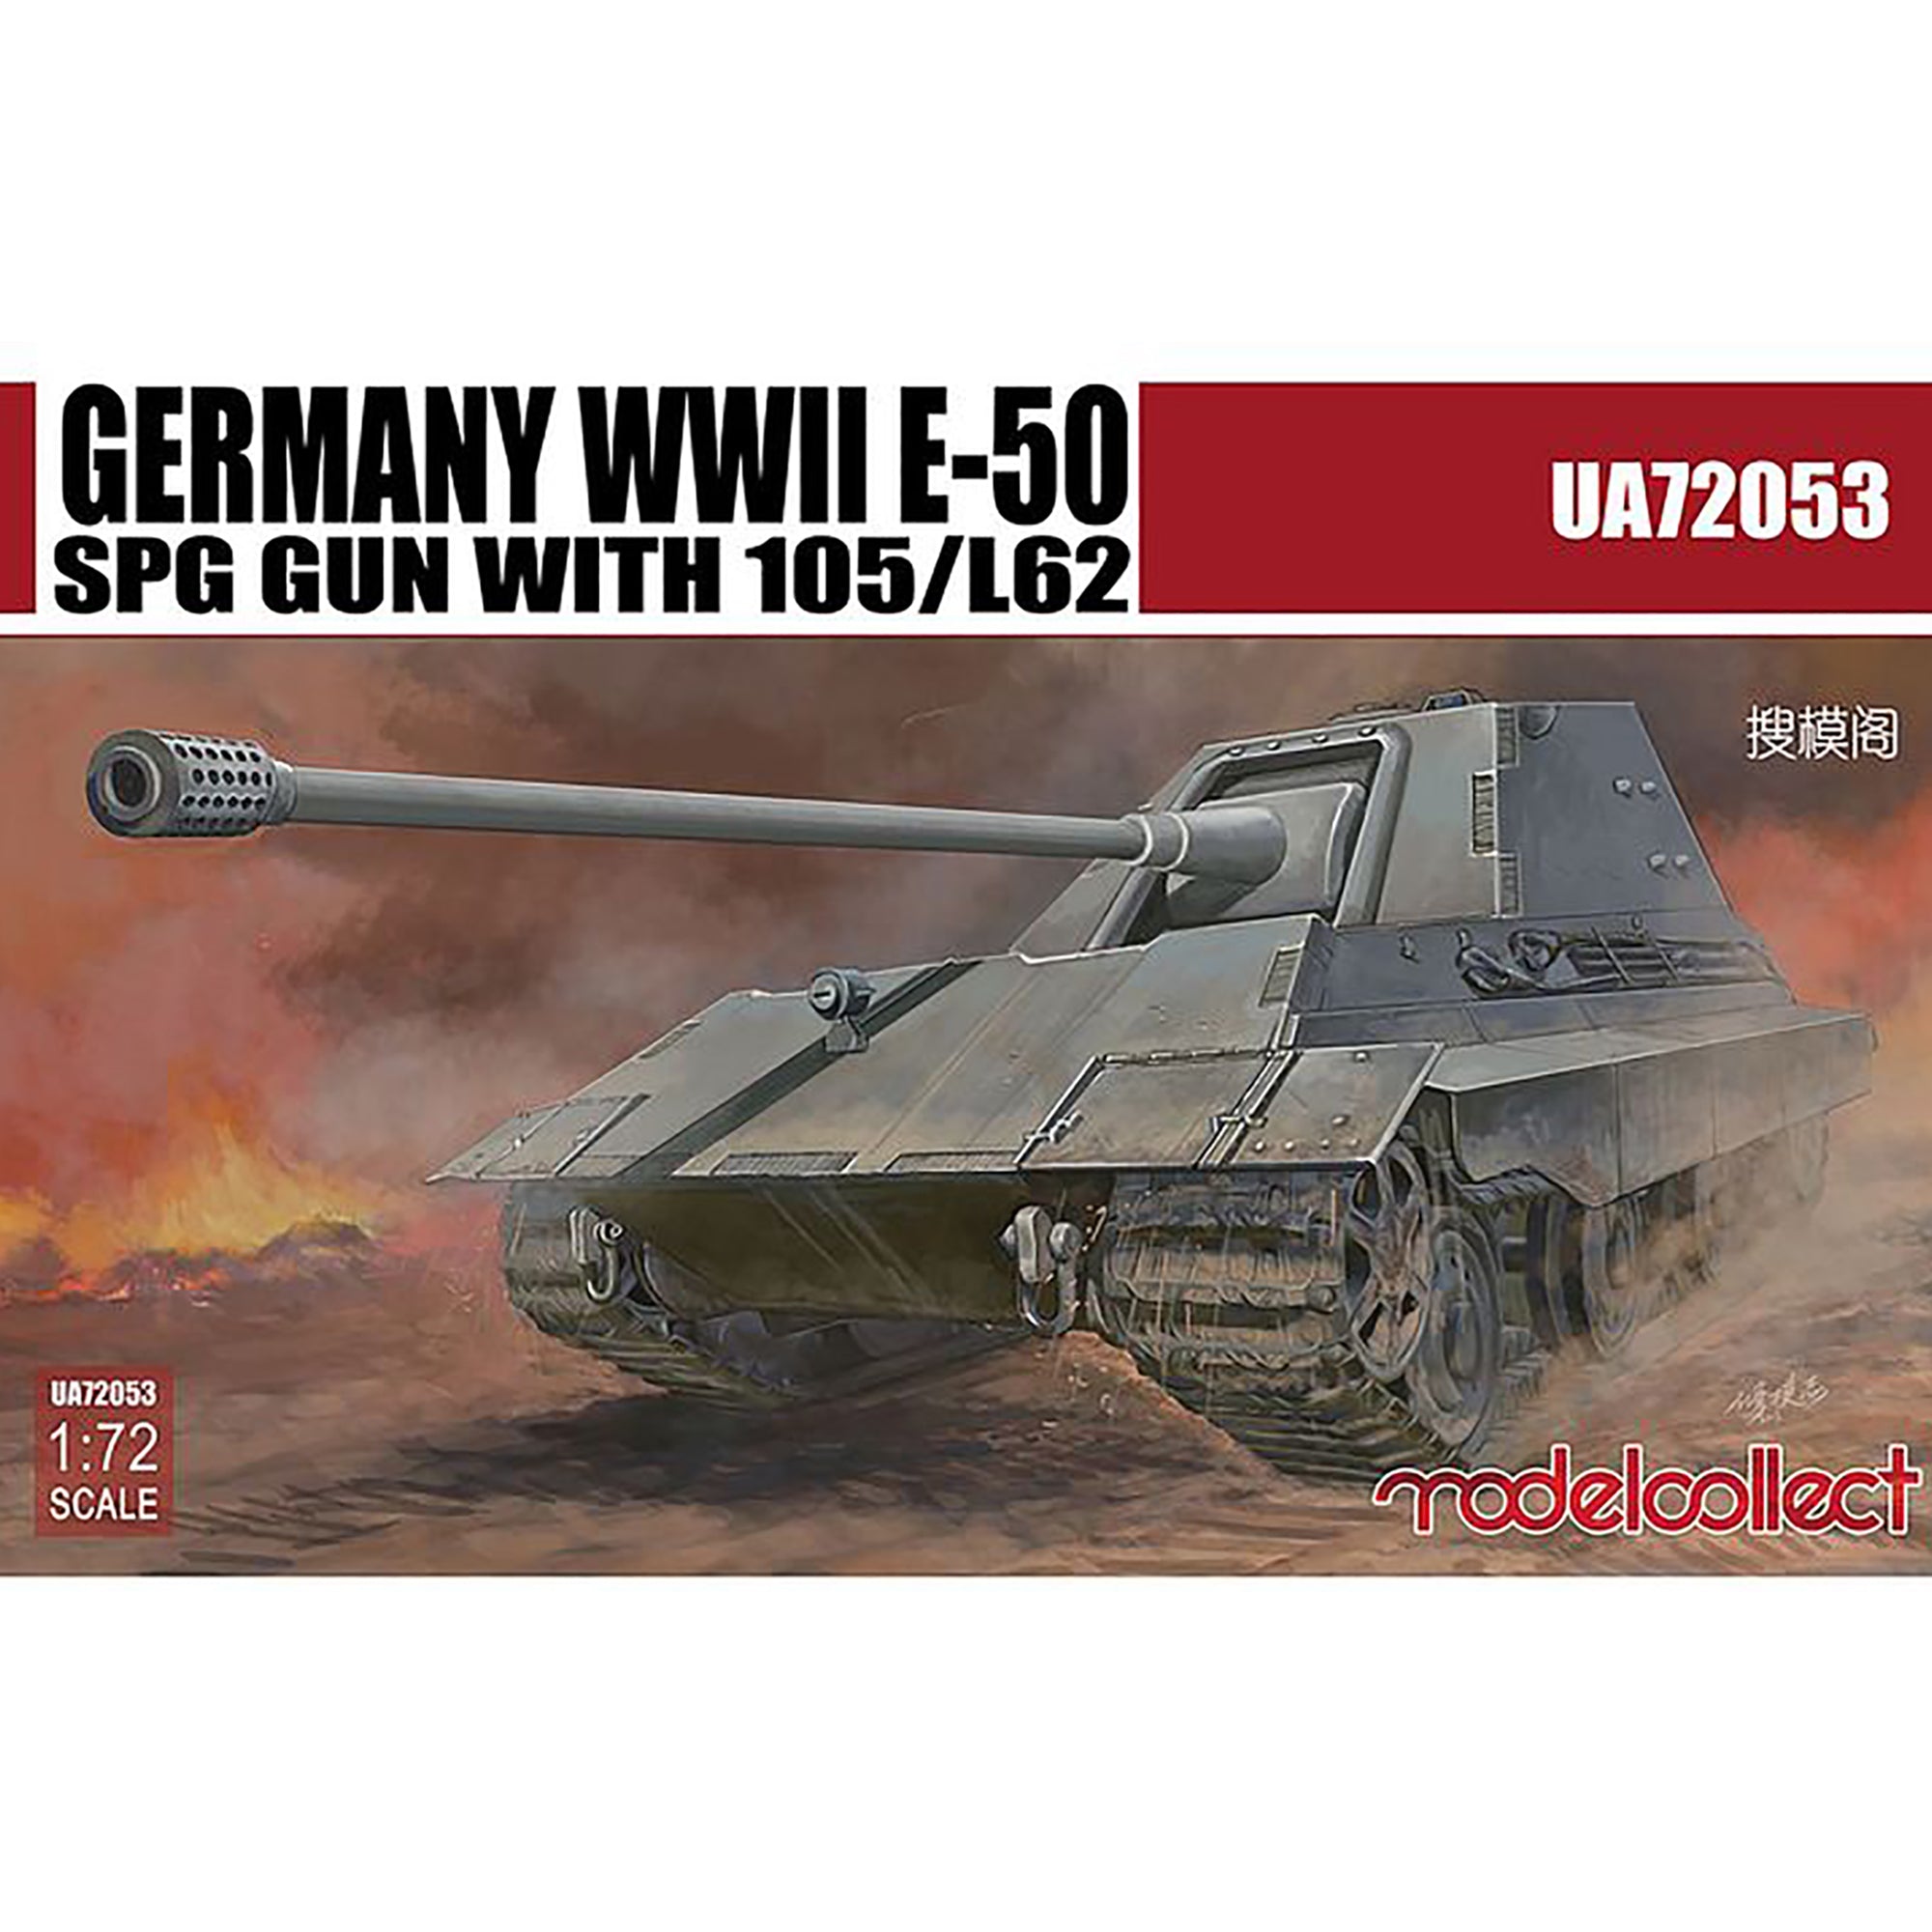 Modelcollect UA72053 1/72 Germany WWII E-50 SPG Gun With 105/L62 Model Kit